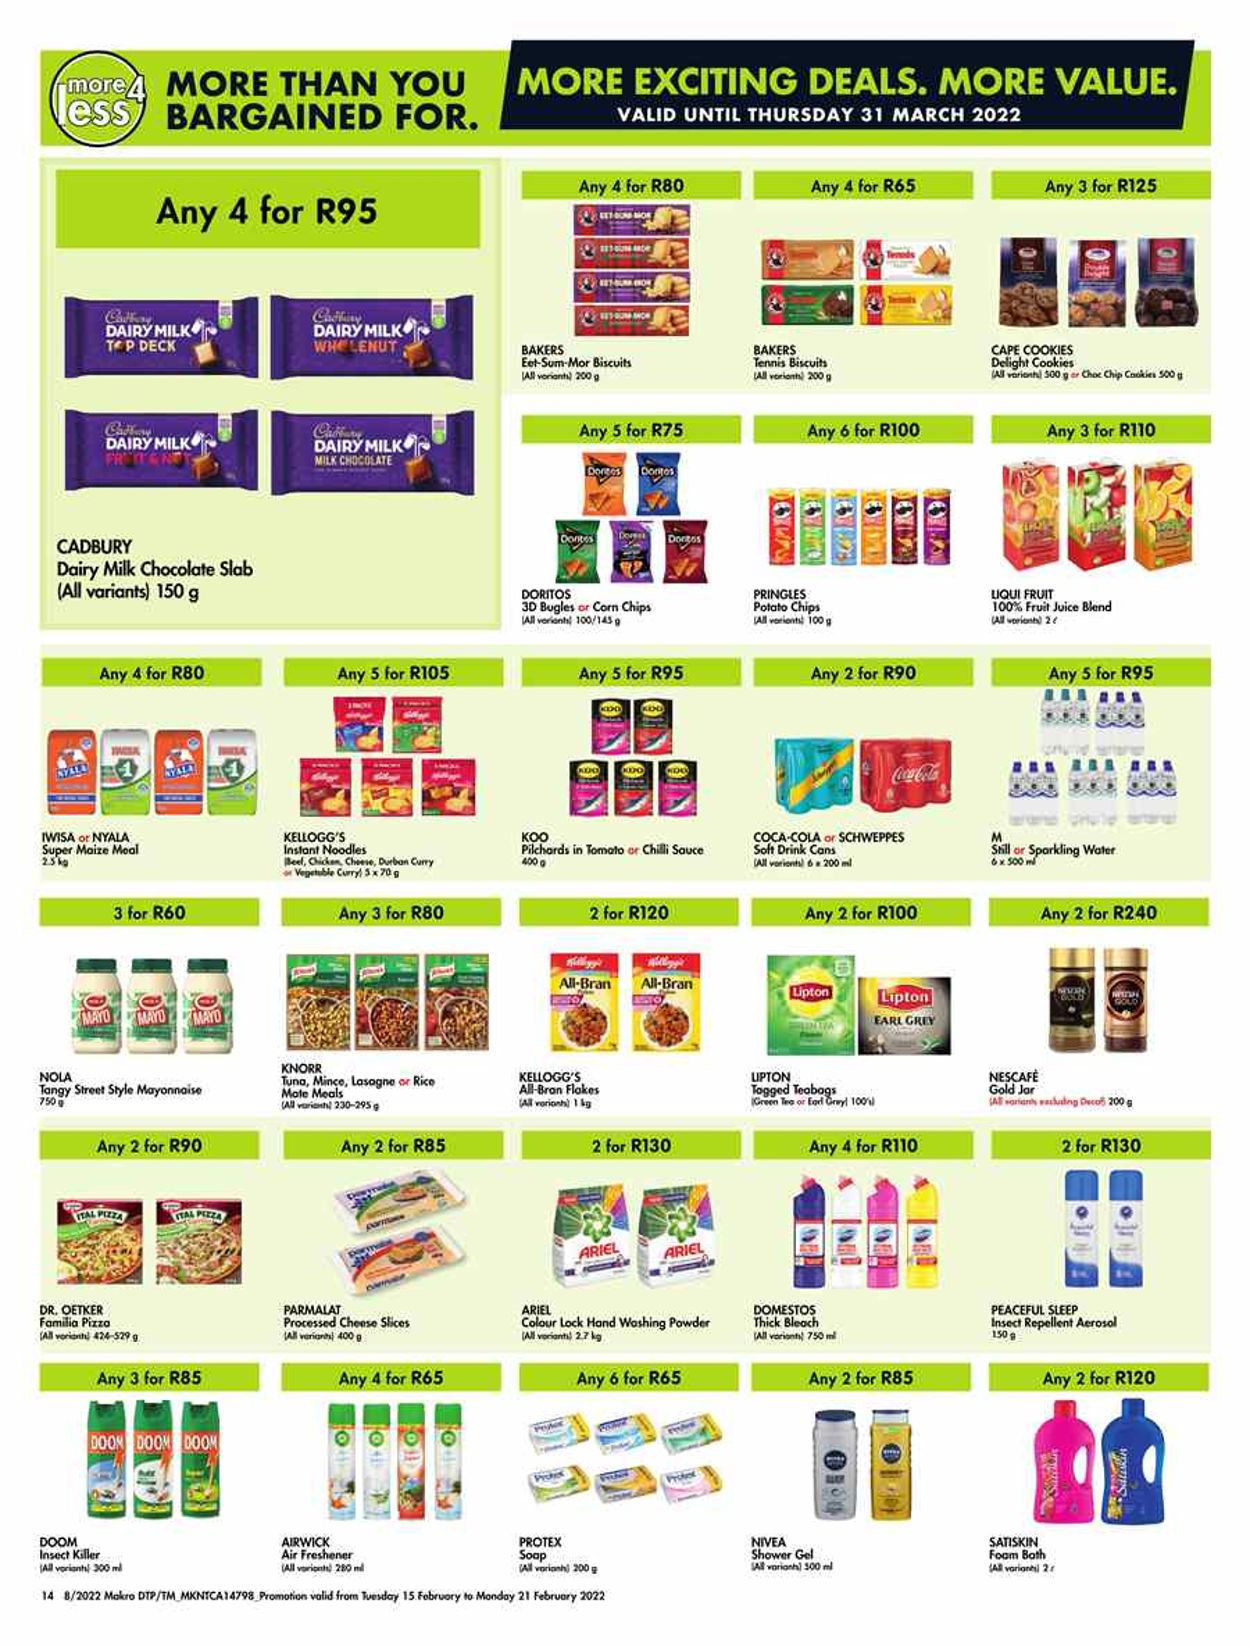 Makro Catalogue from 2022/02/15